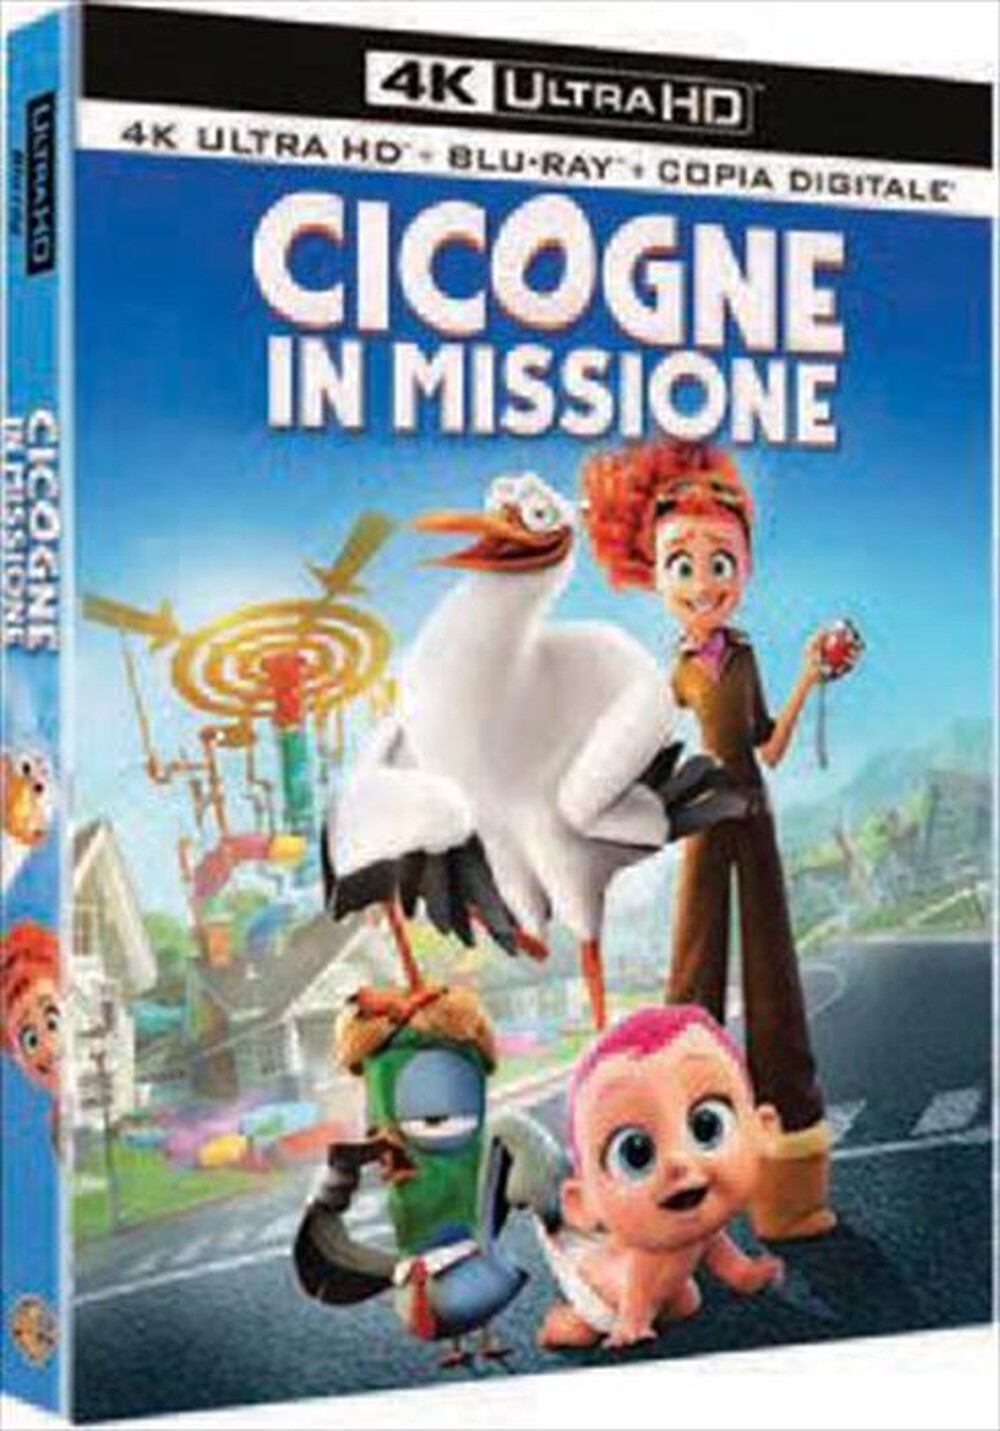 "WARNER HOME VIDEO - Cicogne In Missione (4K Ultra Hd+Blu-Ray)"